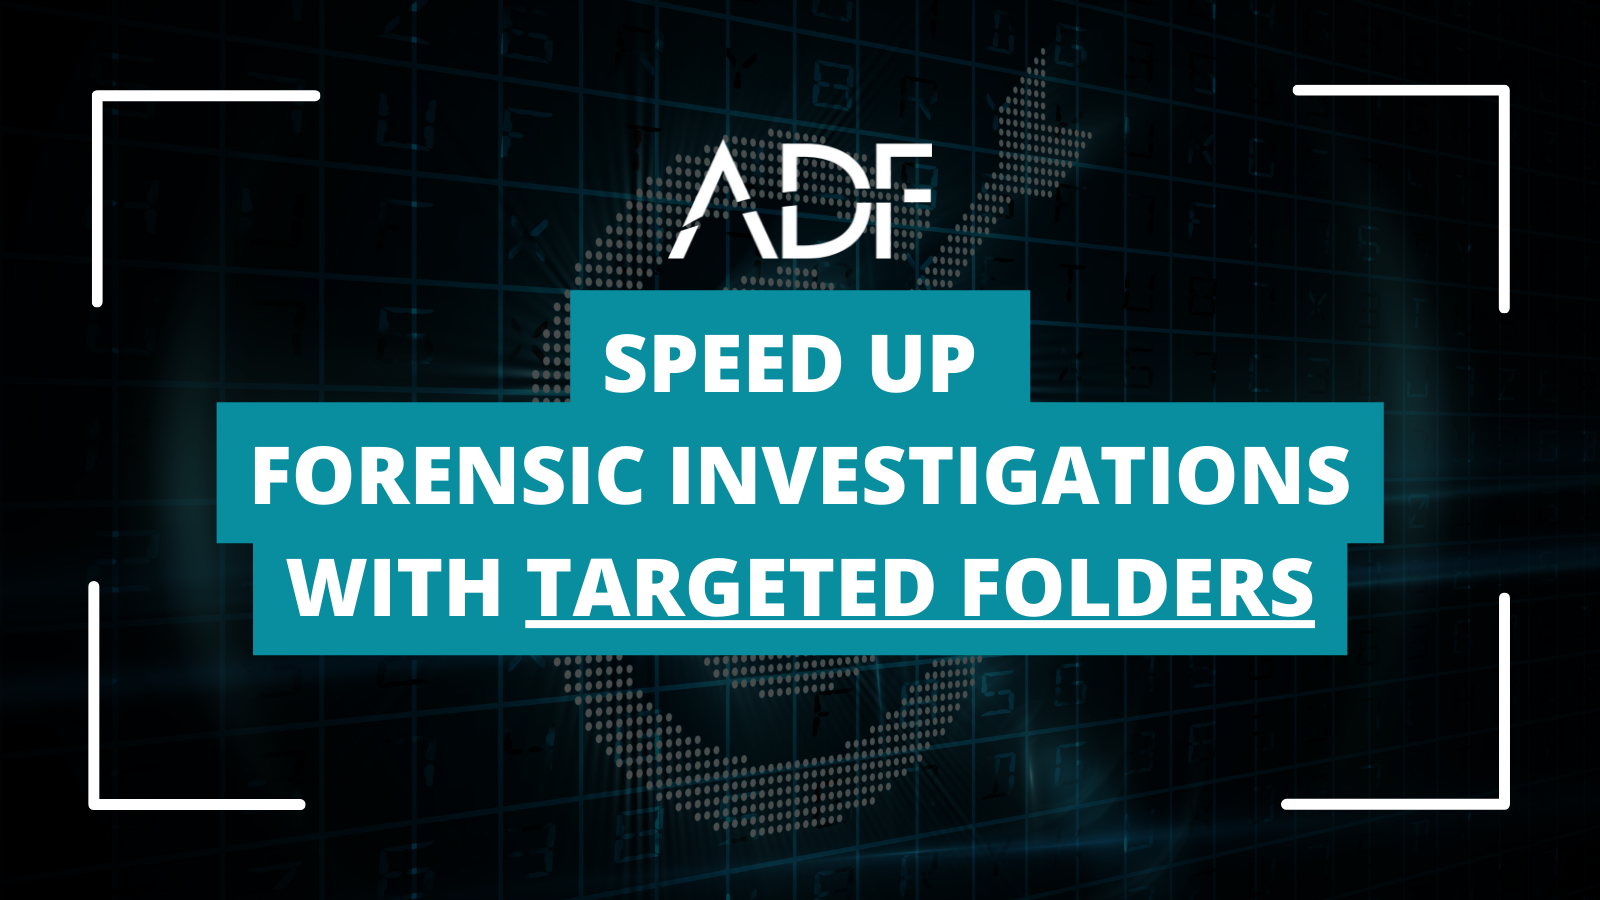 Collecting Files by Targeted Folders to Speed a Forensic Investigation